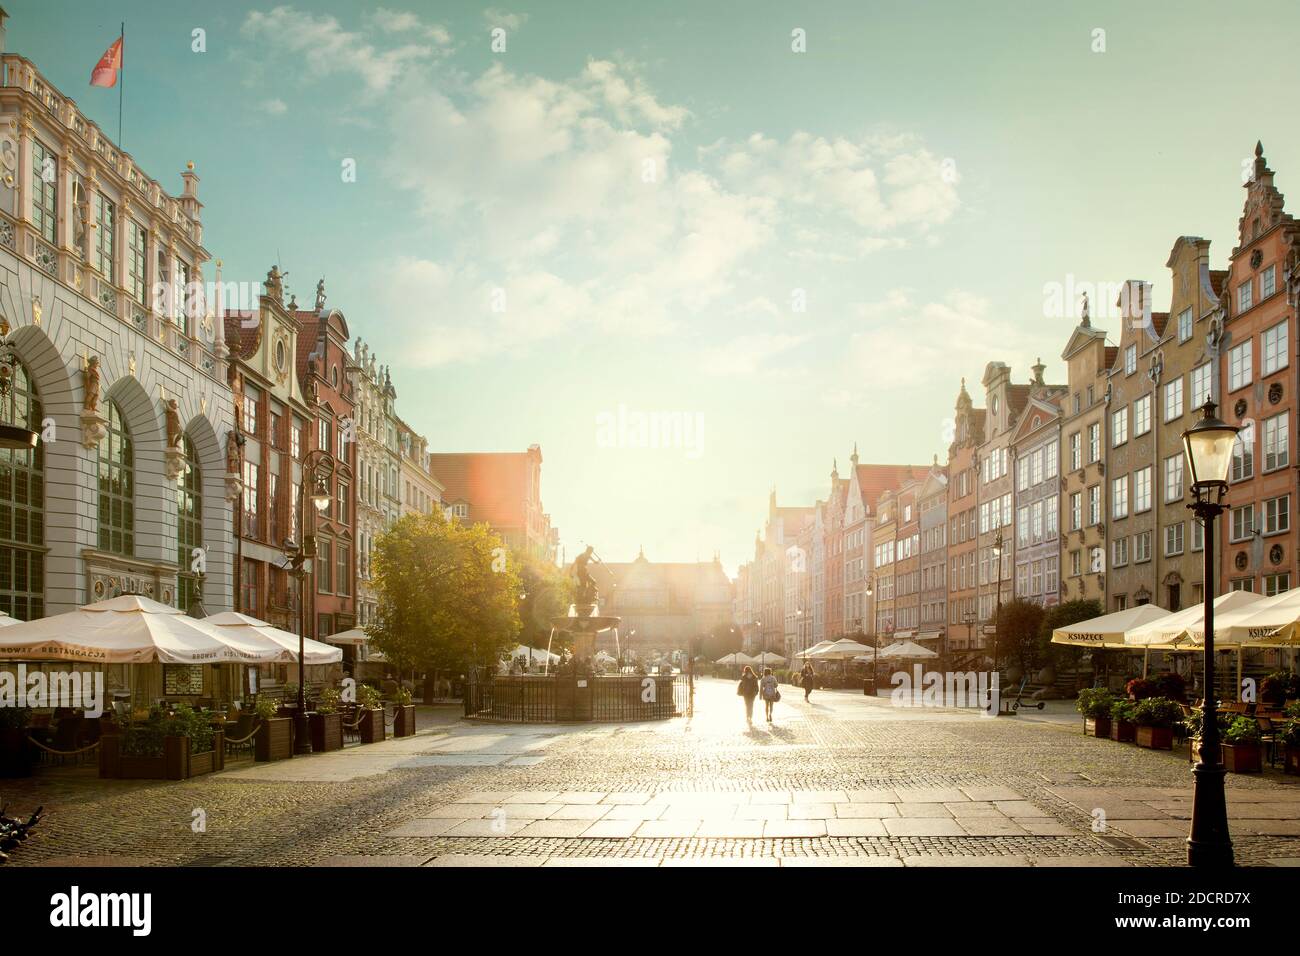 Gdansk, Poland - October 05, 2020: Cityscape panorama of old town of Gdansk city, Poland Stock Photo